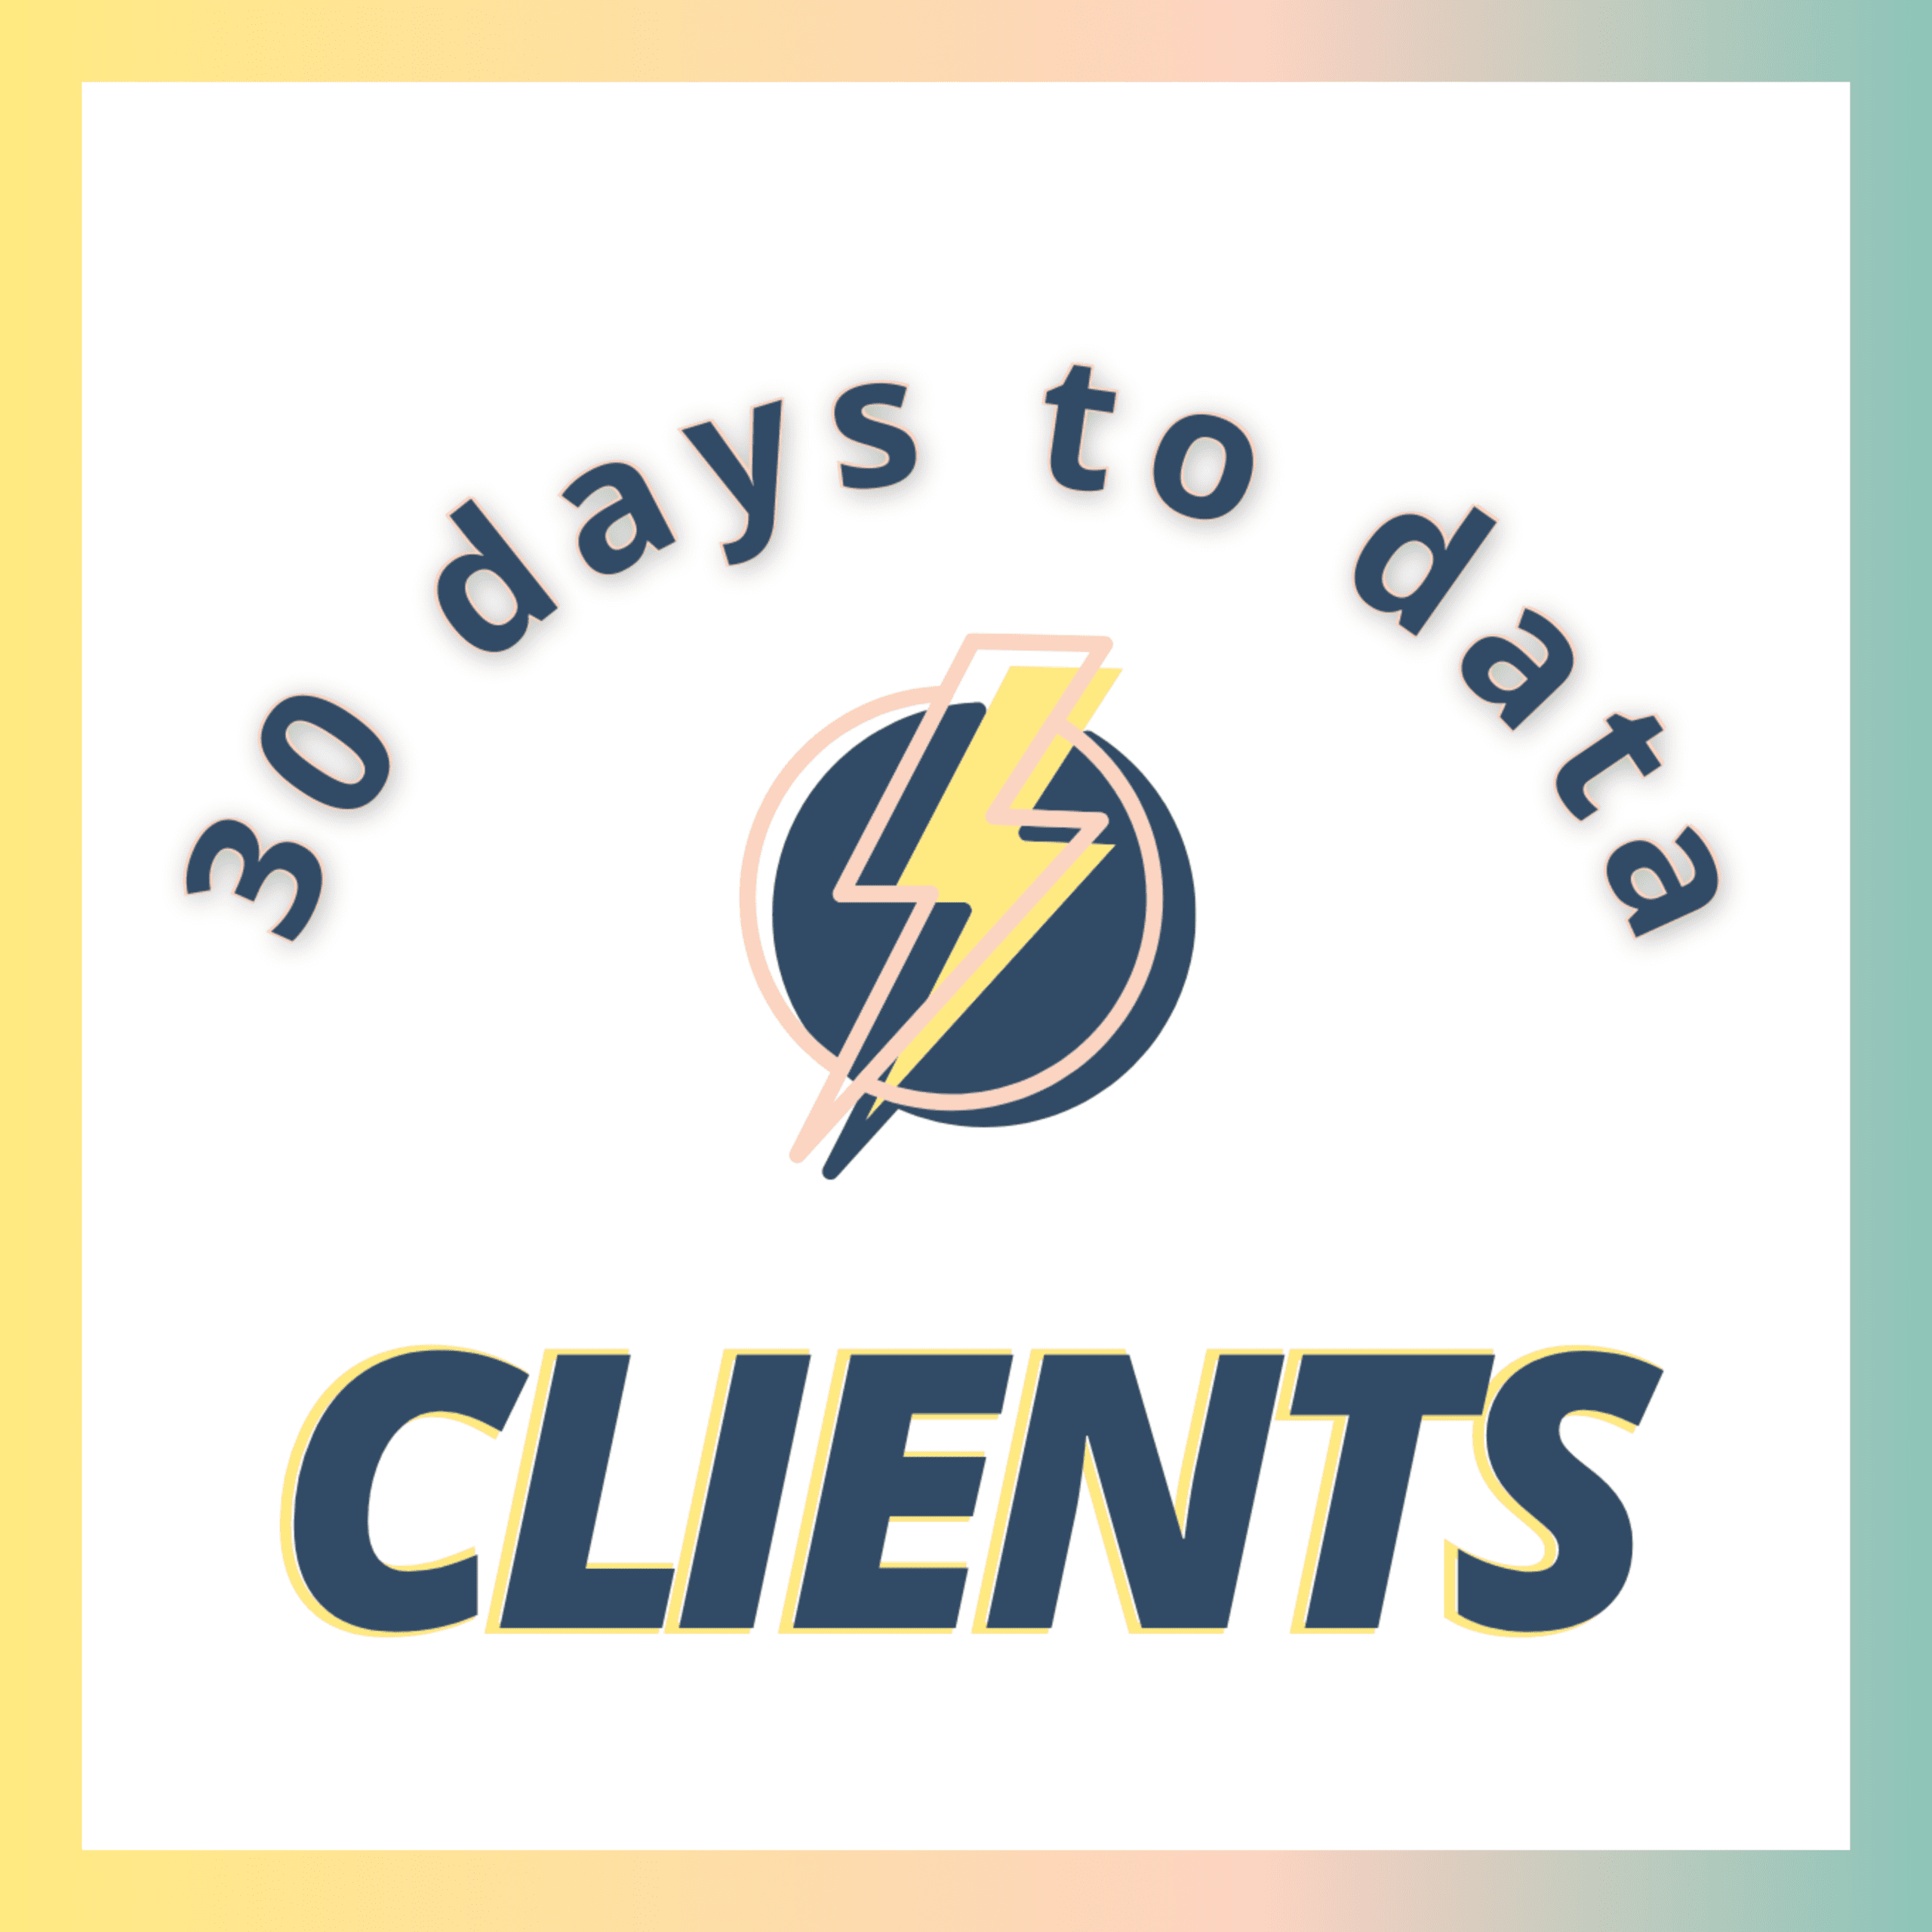 30-Days-To-Data-Clients-Shop-Cover